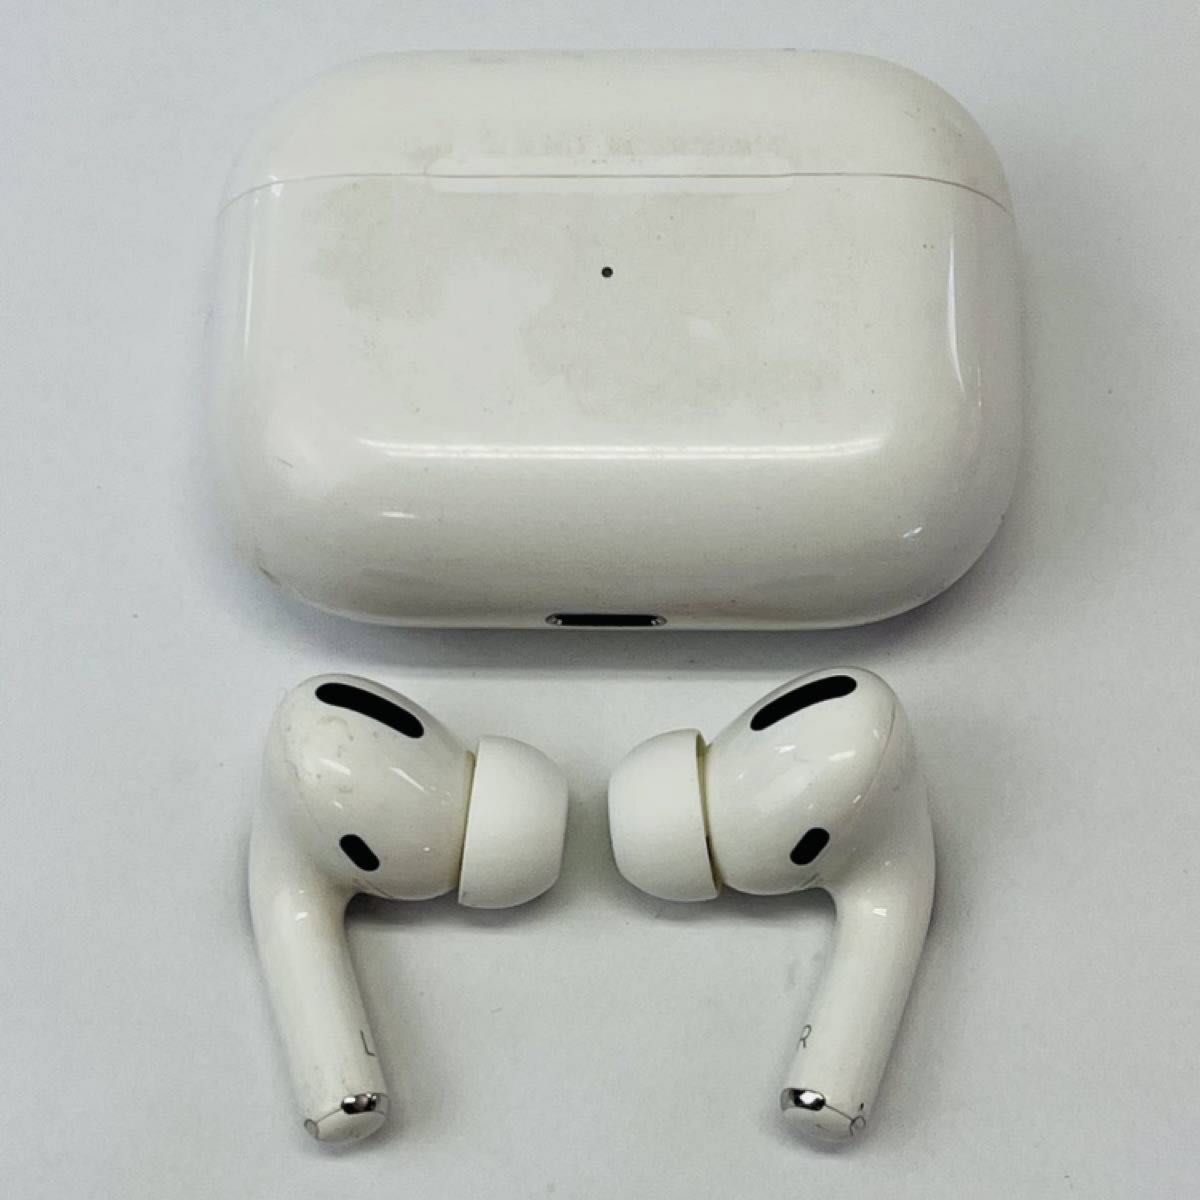 airpods pro 第1世代　APPLE MWP22J A 難あり